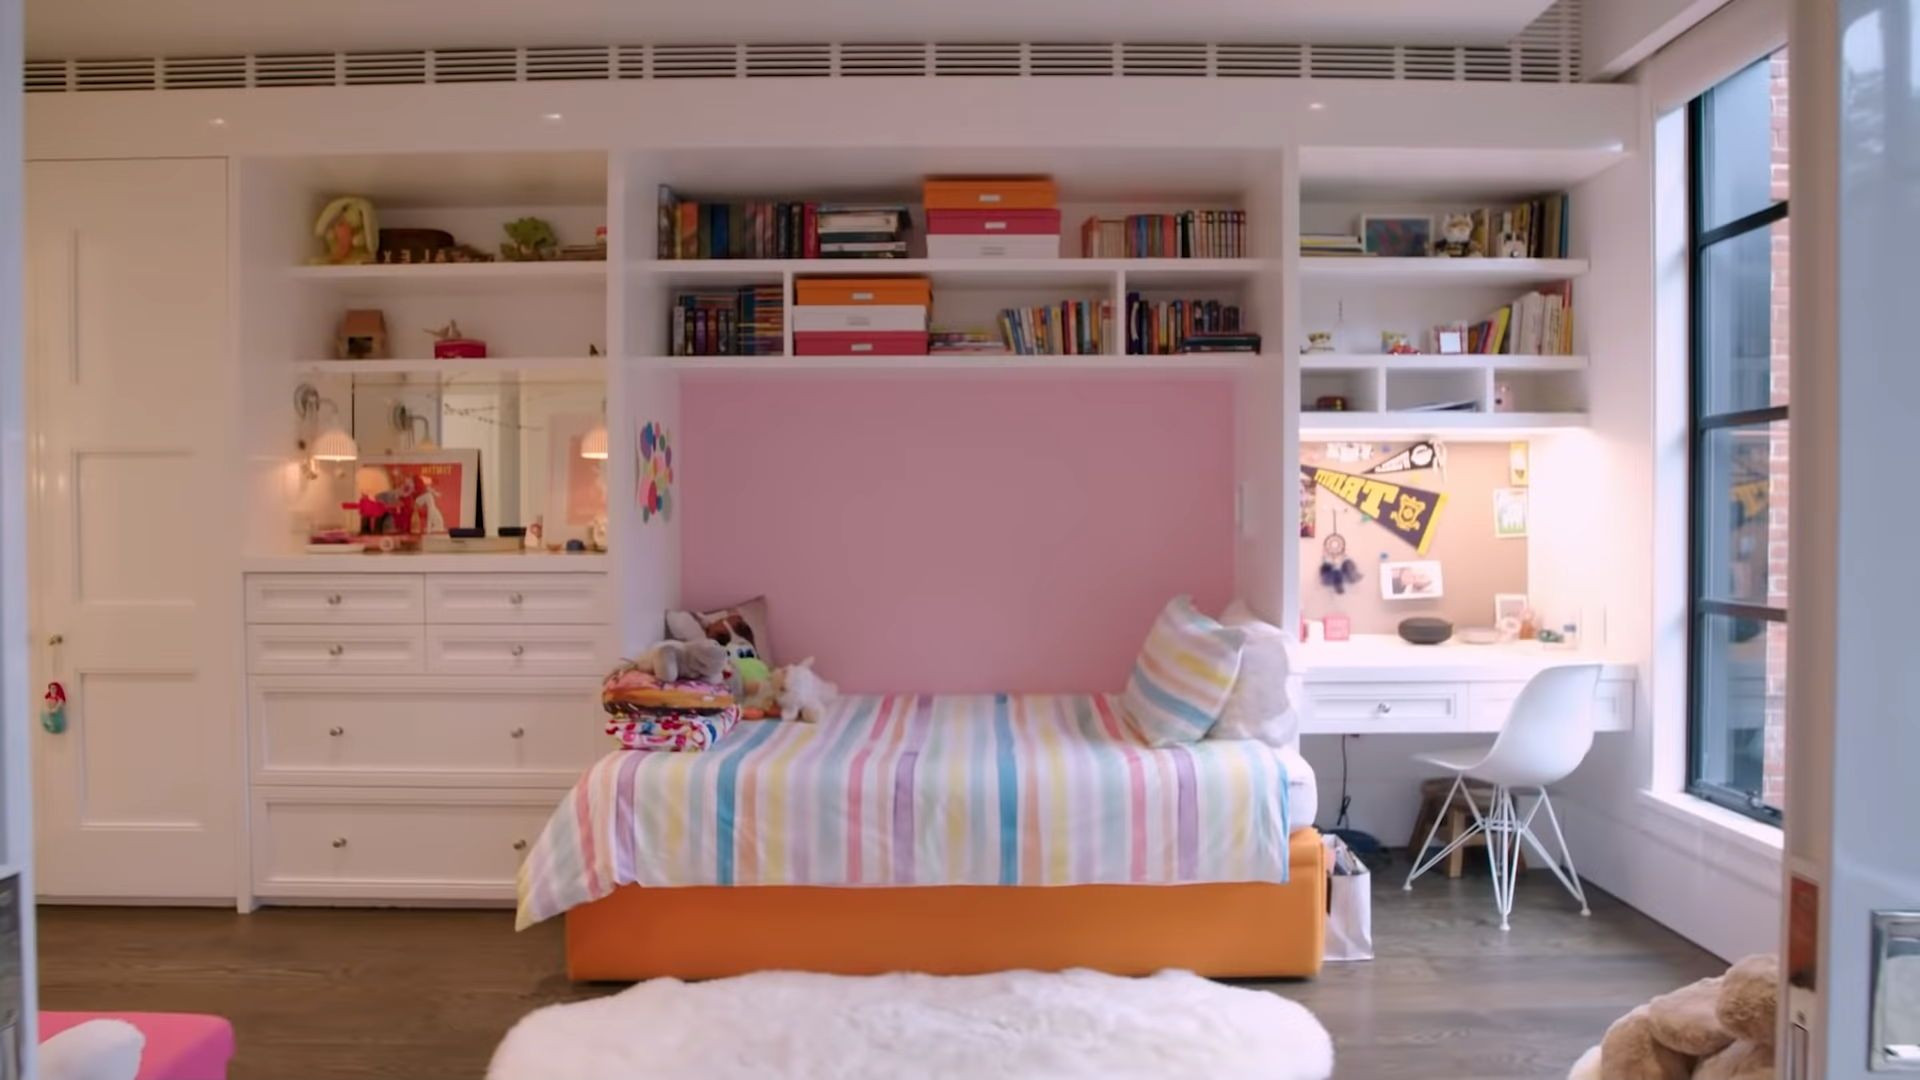 Bedroom Wall Units With Drawers
 Pink And White Bedroom Wall Units With Drawers Shelves And